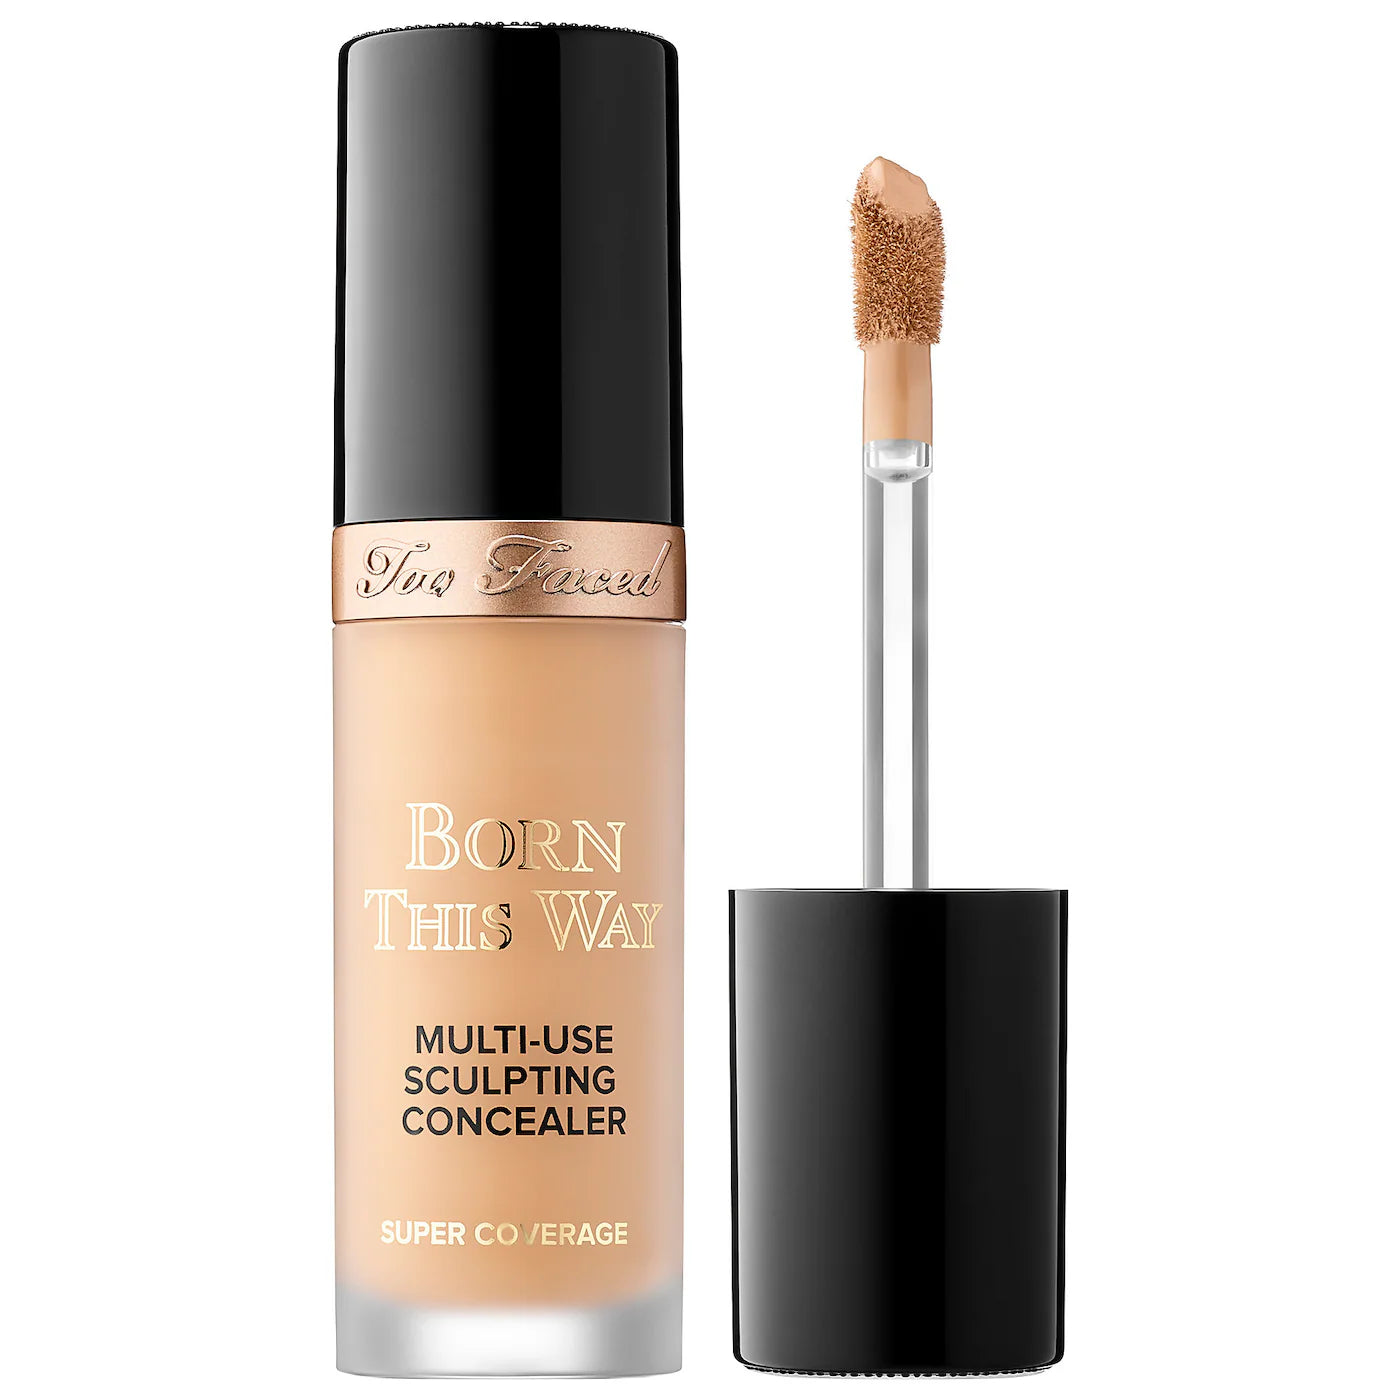 Too Faced - Born This Way Super Coverage Multi-Use Concealer | 13.5 mL